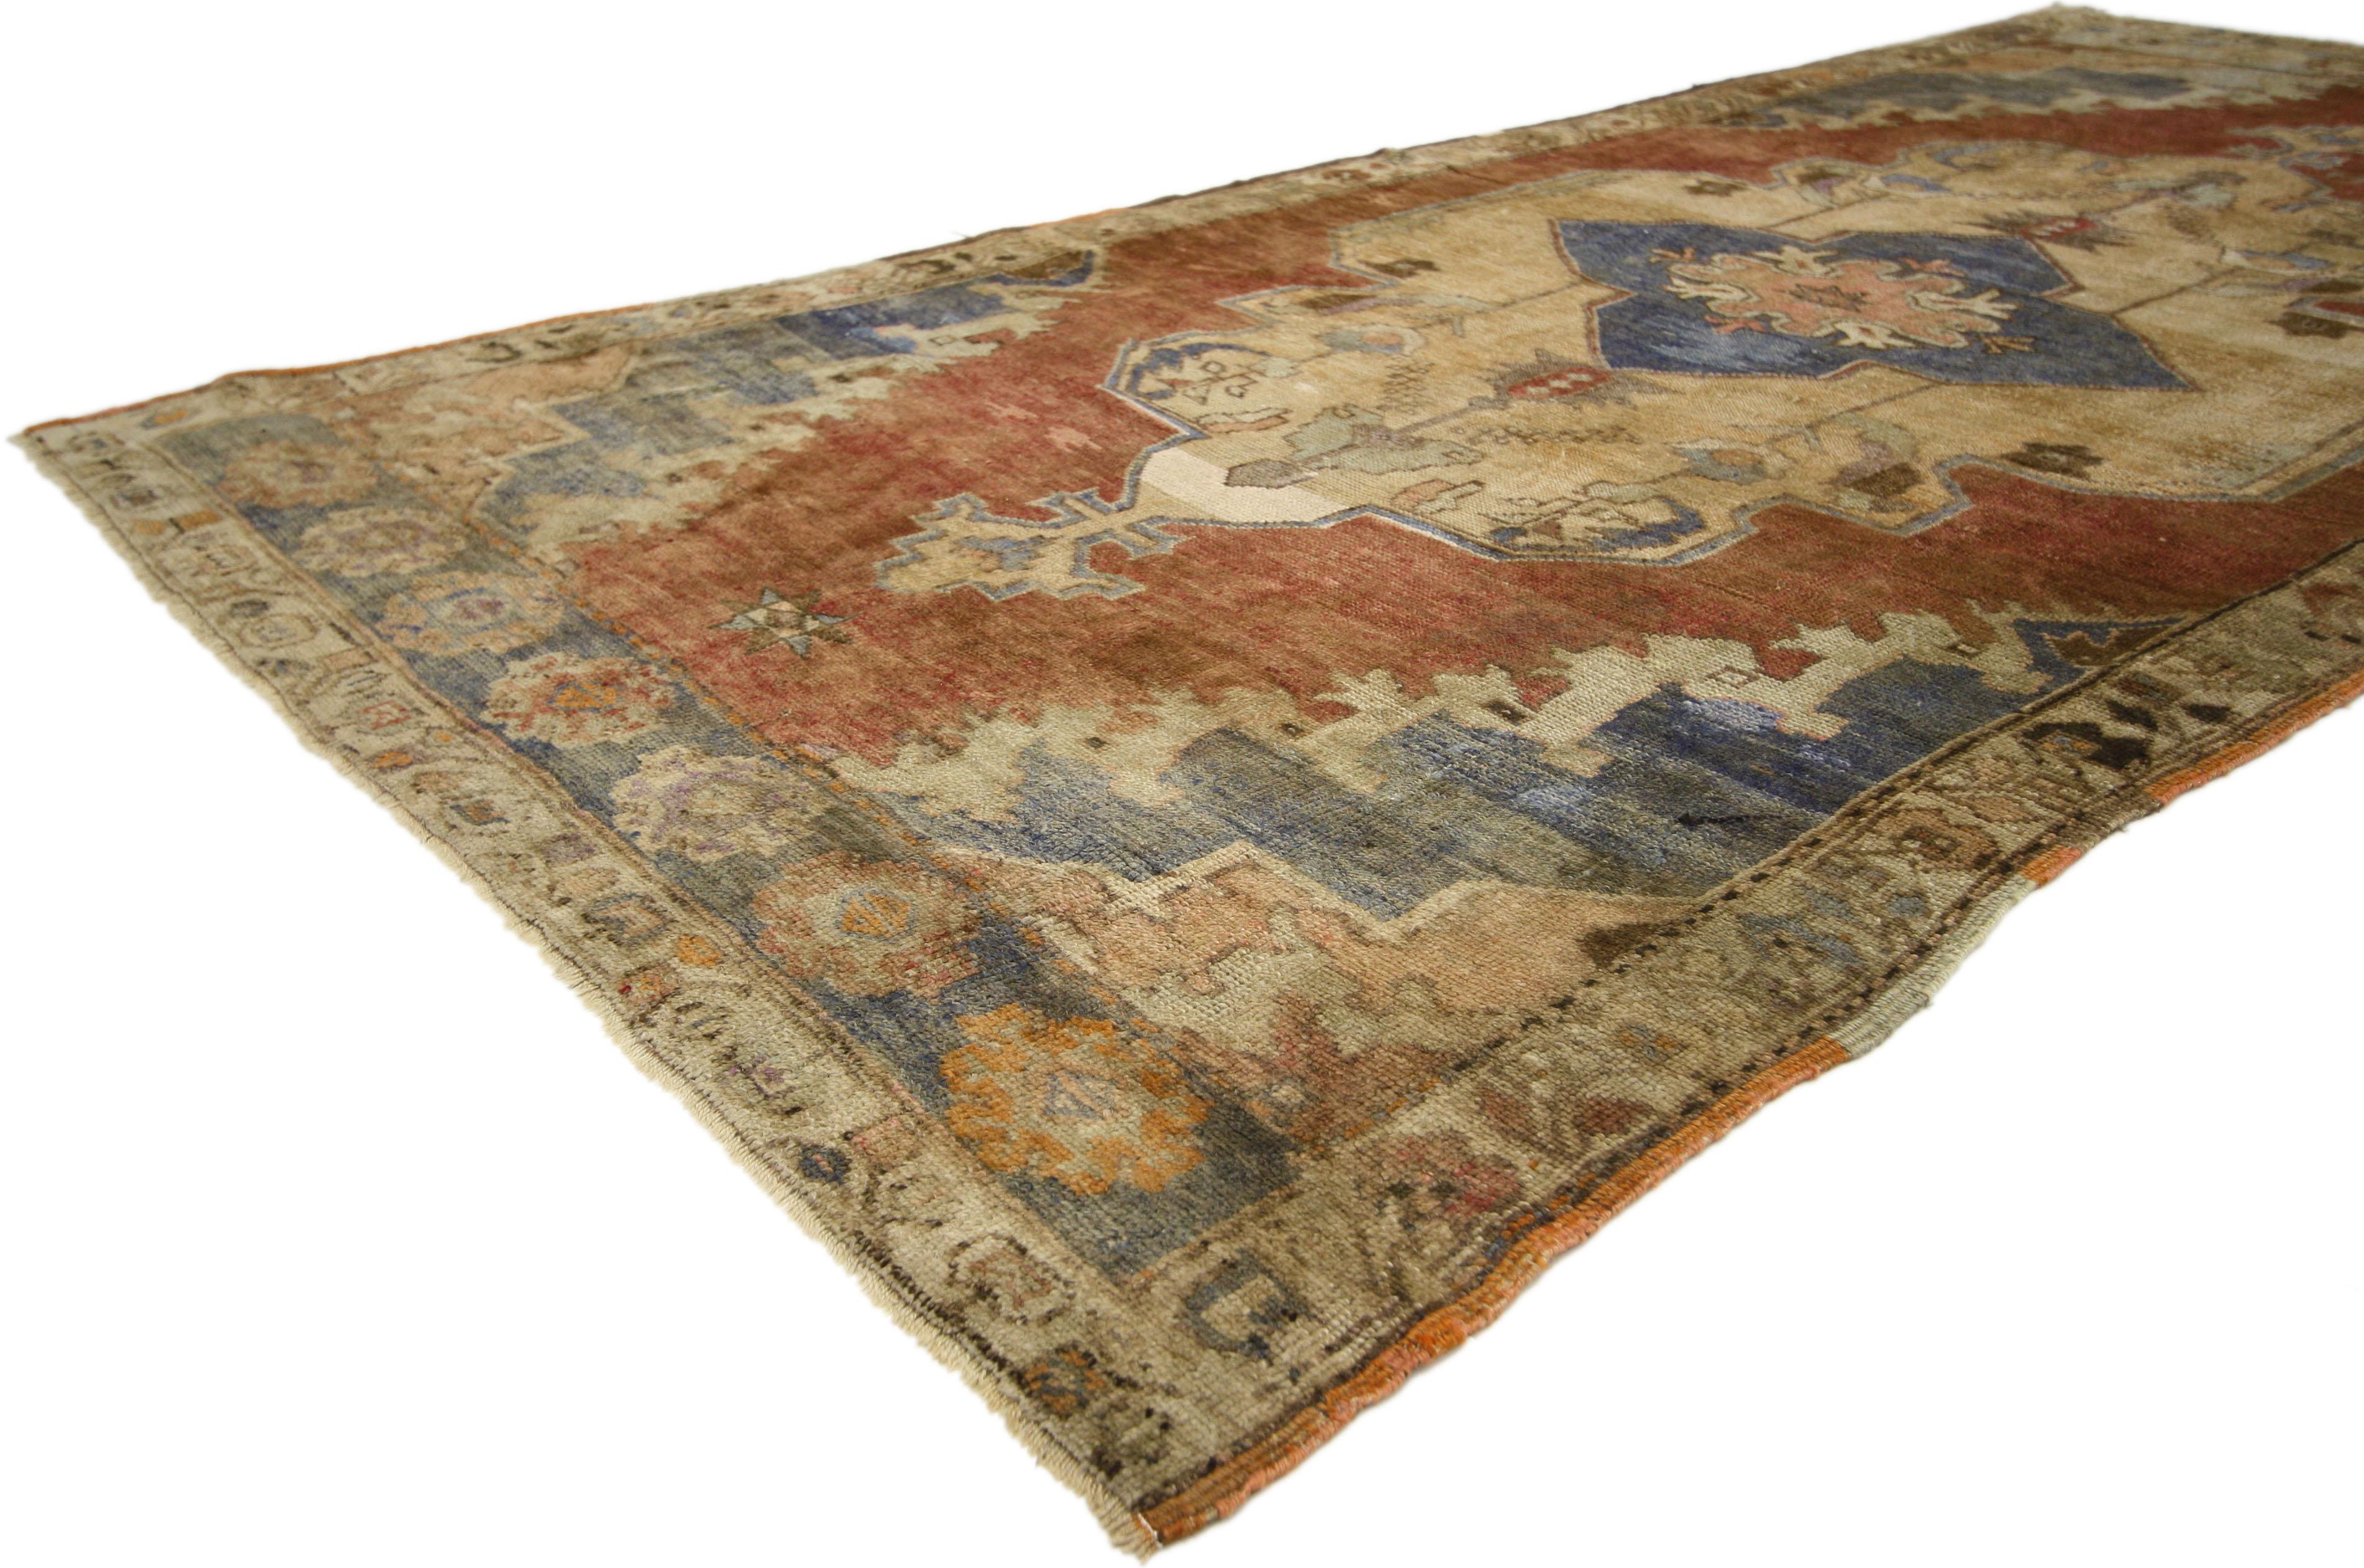 50312, vintage Turkish Oushak rug with craftsman French Provincial style. This hand knotted wool vintage Turkish Oushak rug features a large scalloped center medallion with palmette anchor pendants floating on an abrashed terra cotta field. The